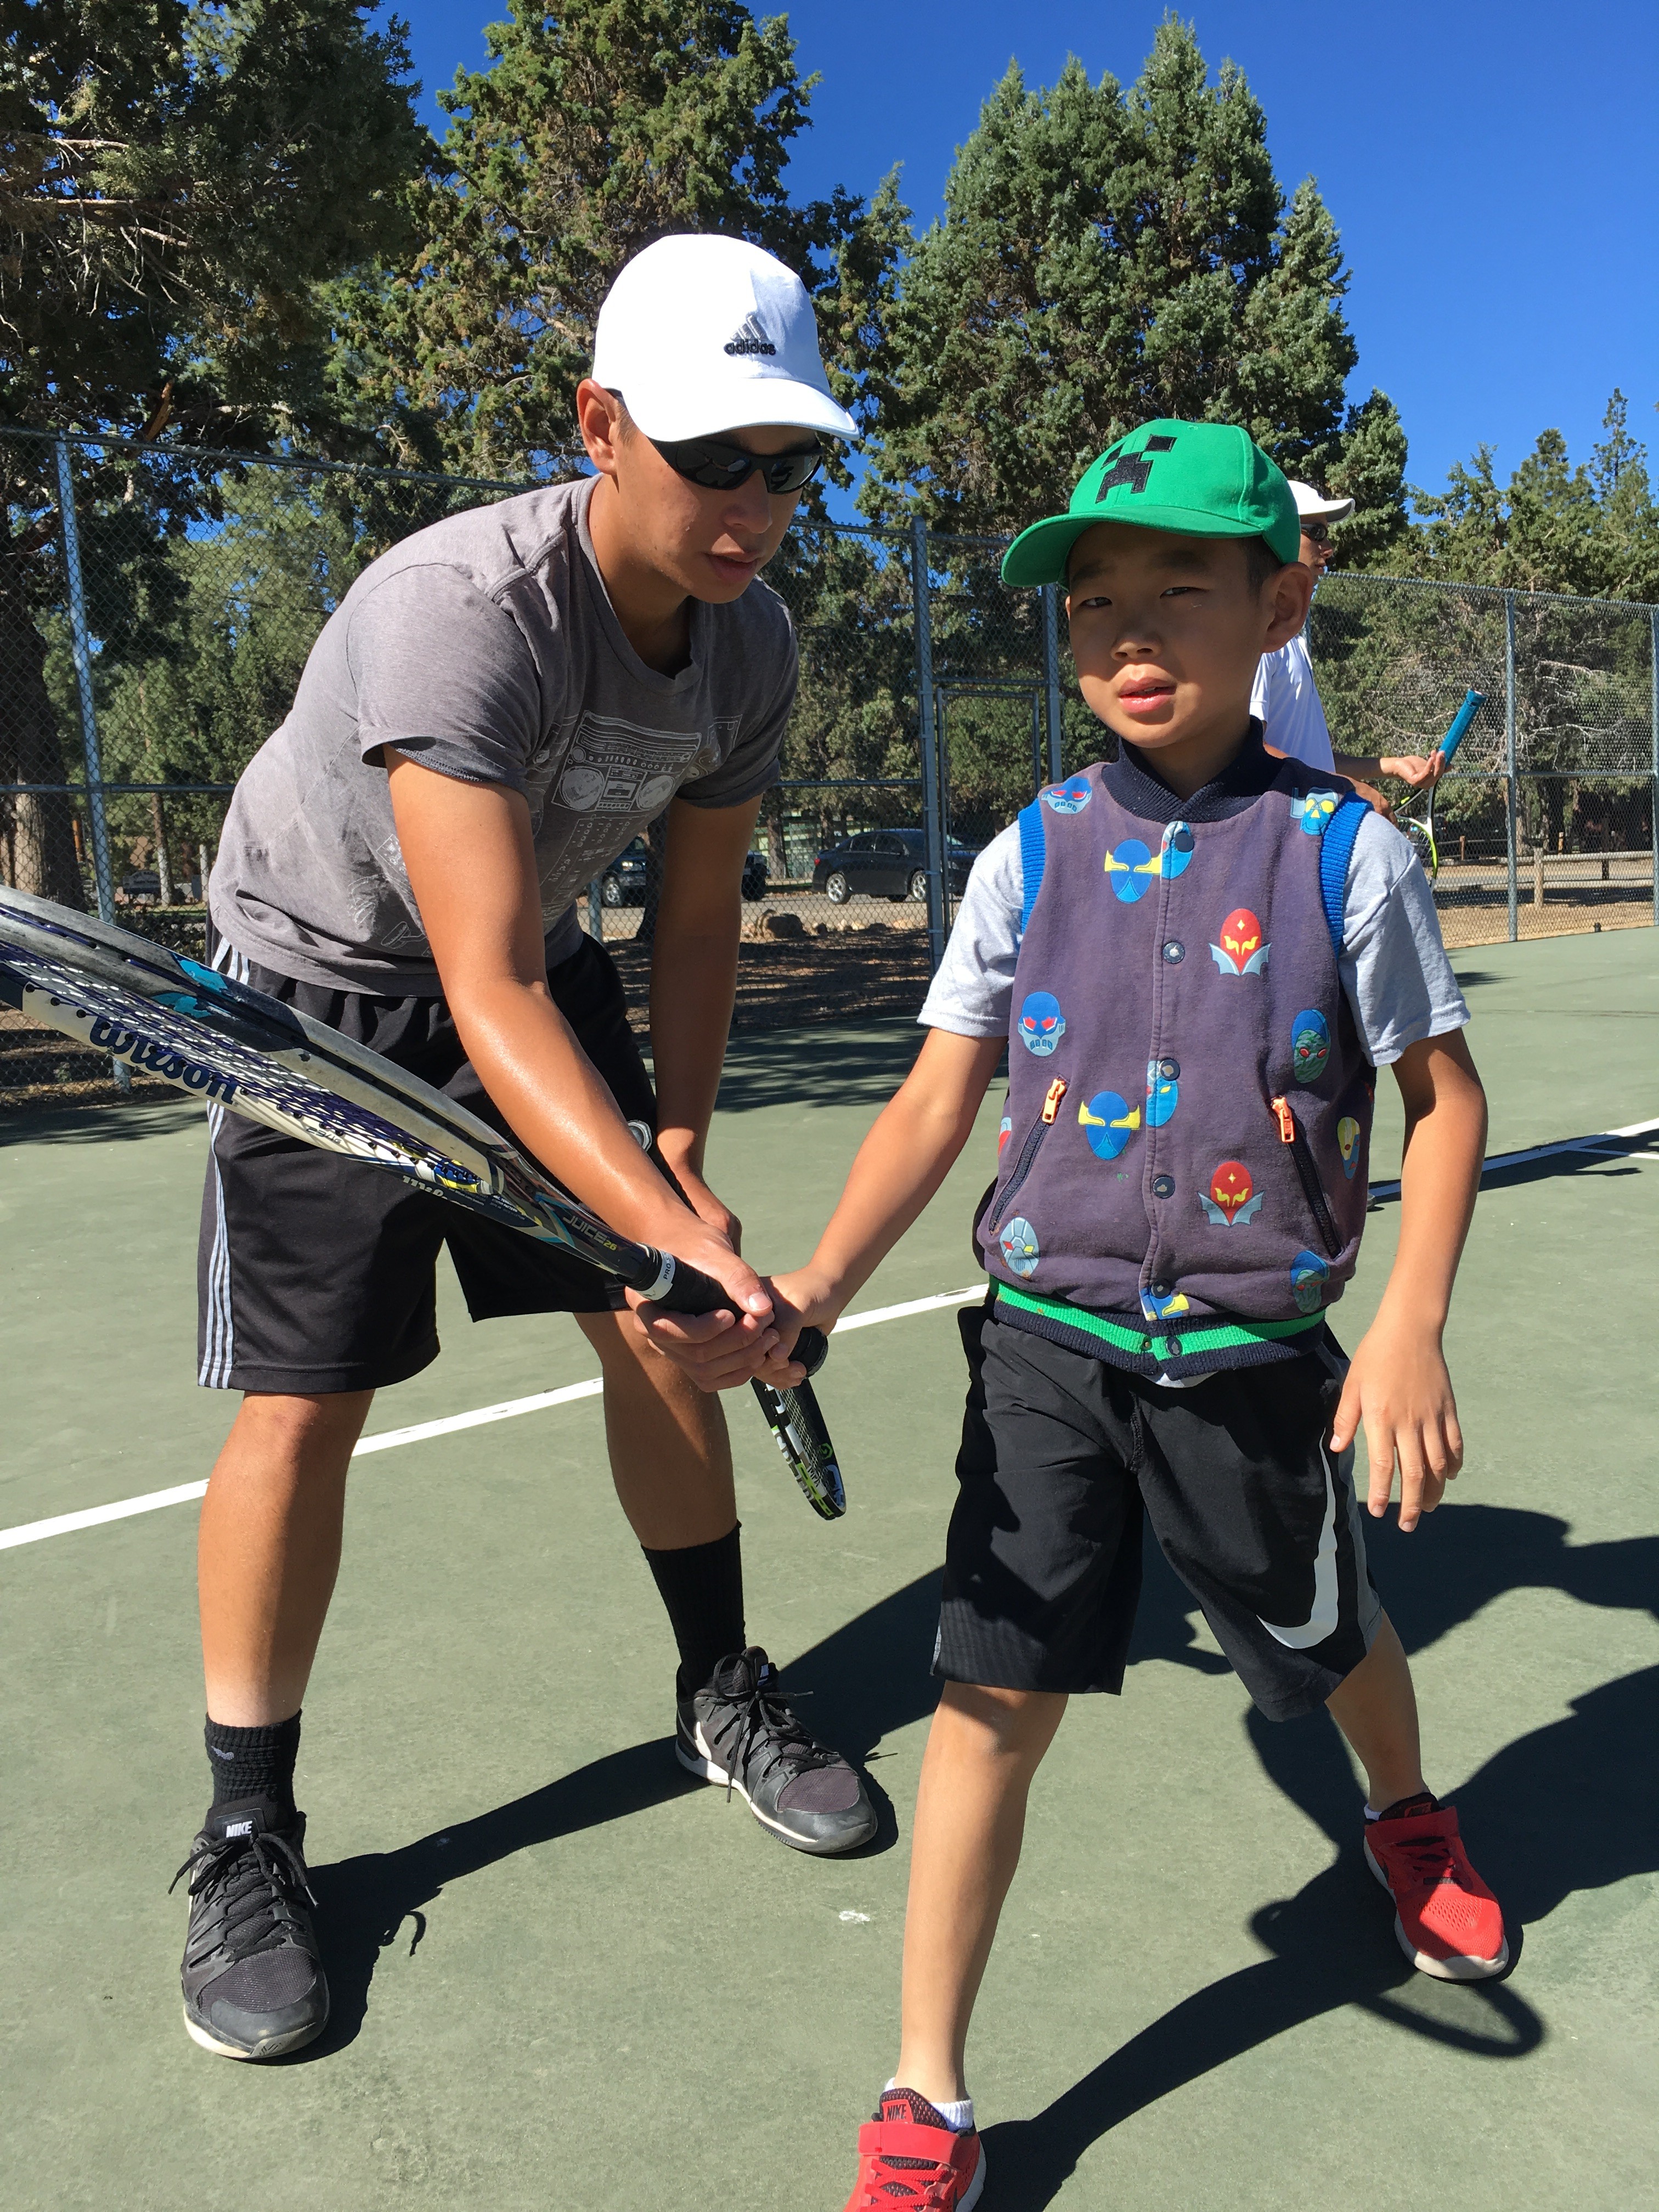 4 Things You’ll Learn at Tennis Camp This Summer